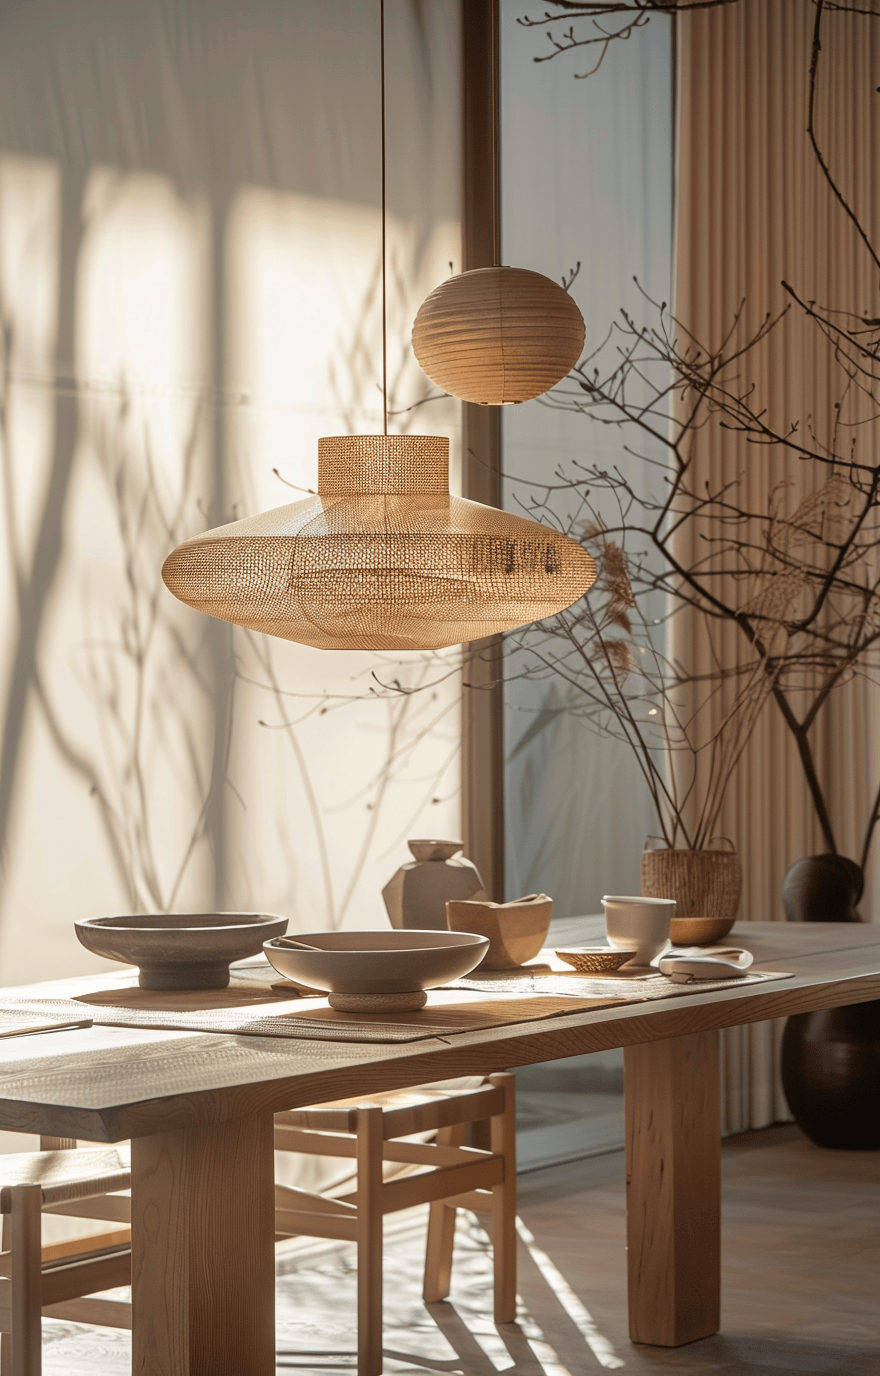 Japandi dining room guide for merging minimalism with cozy warmth